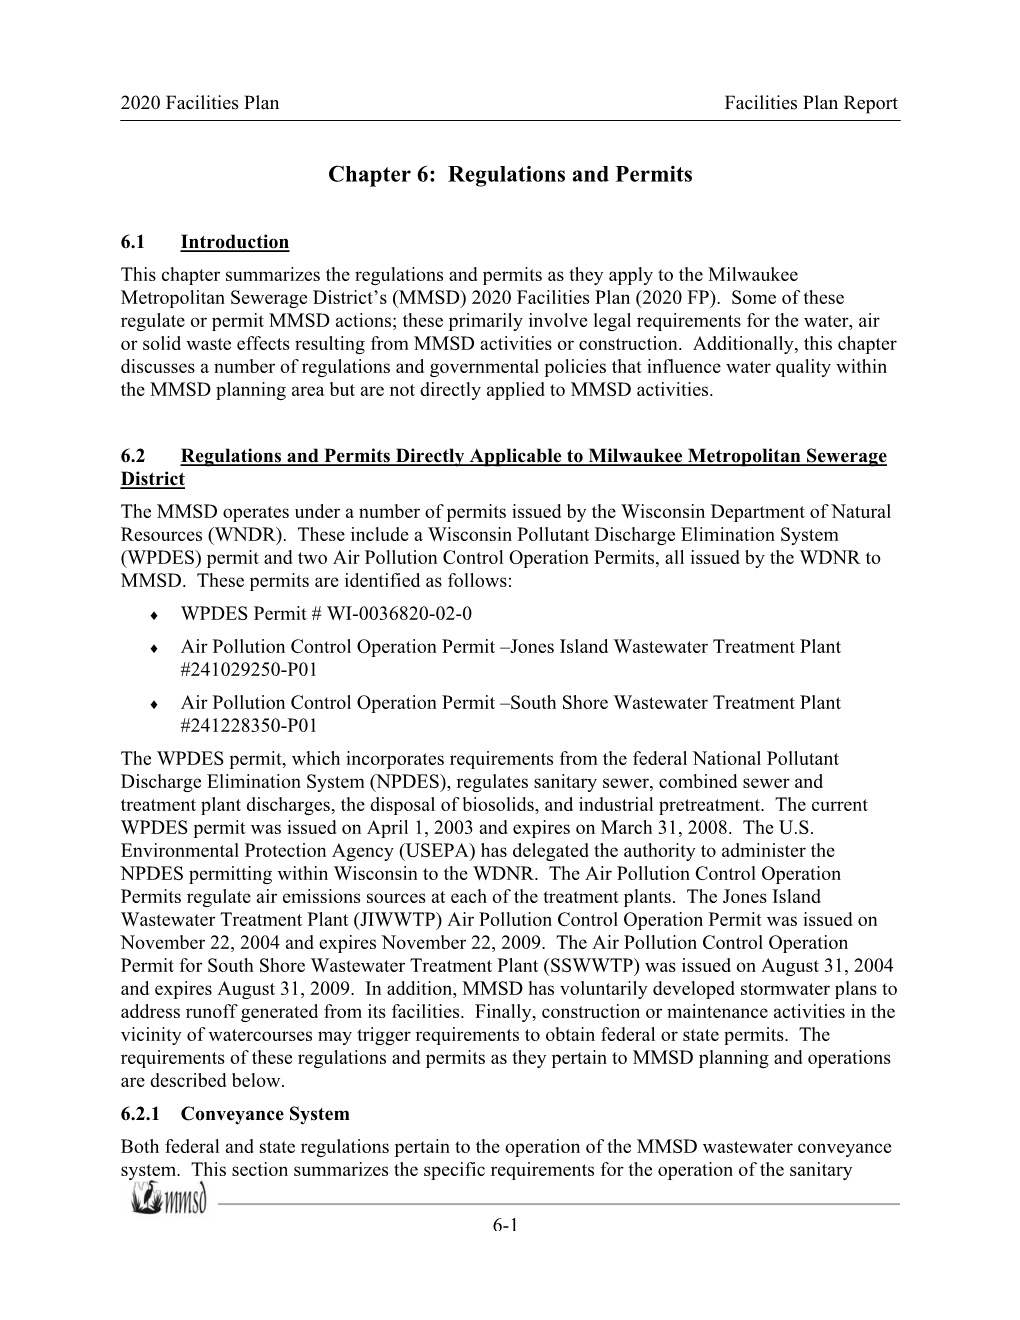 Chapter 6: Regulations and Permits